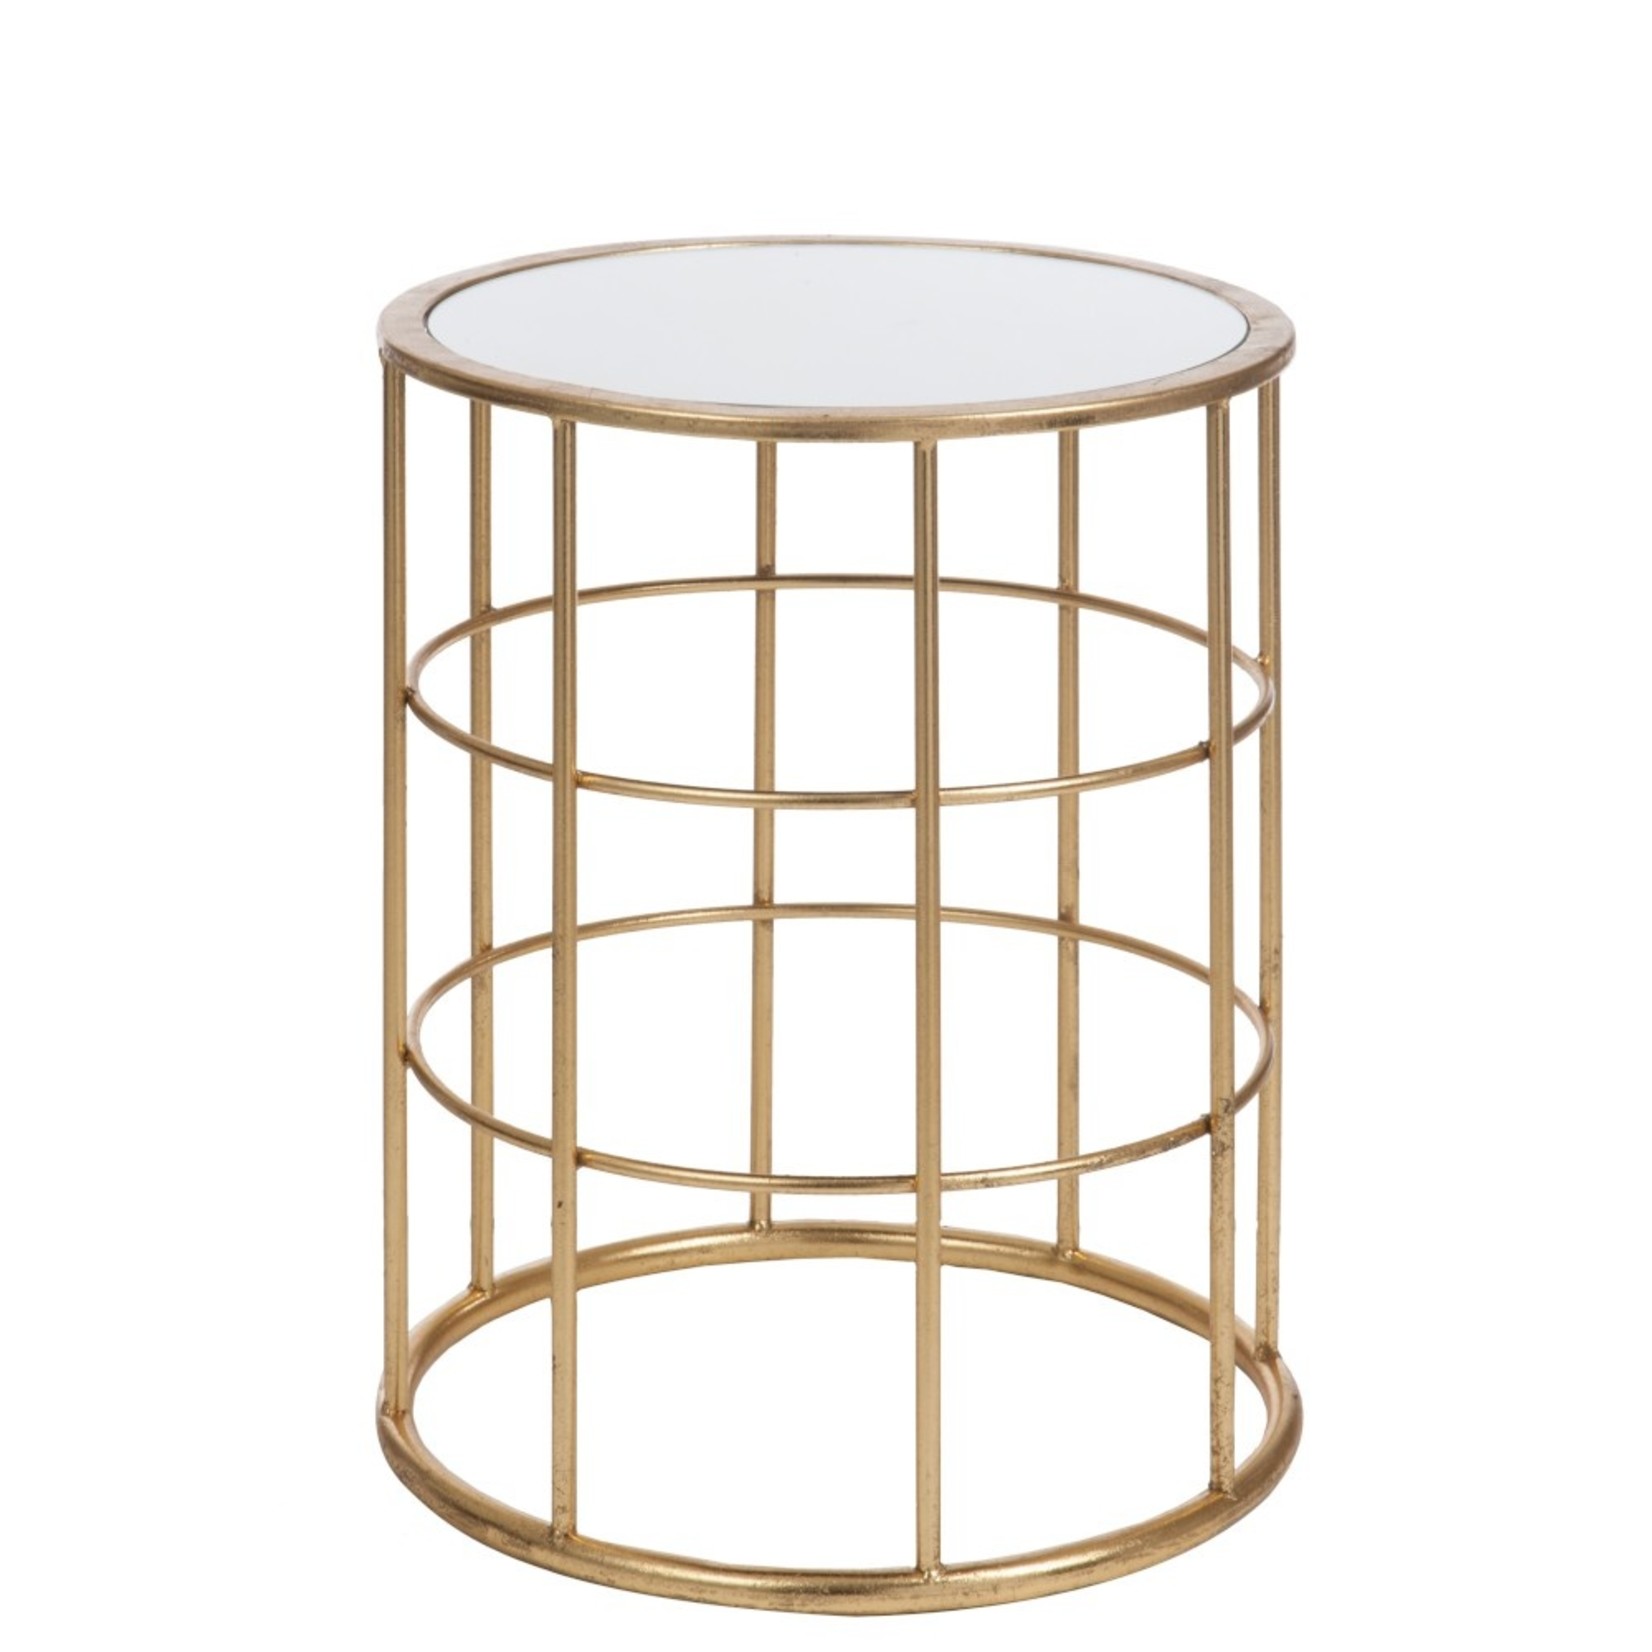 J-Line Decorative Side table Round High Metal Glass - Gold